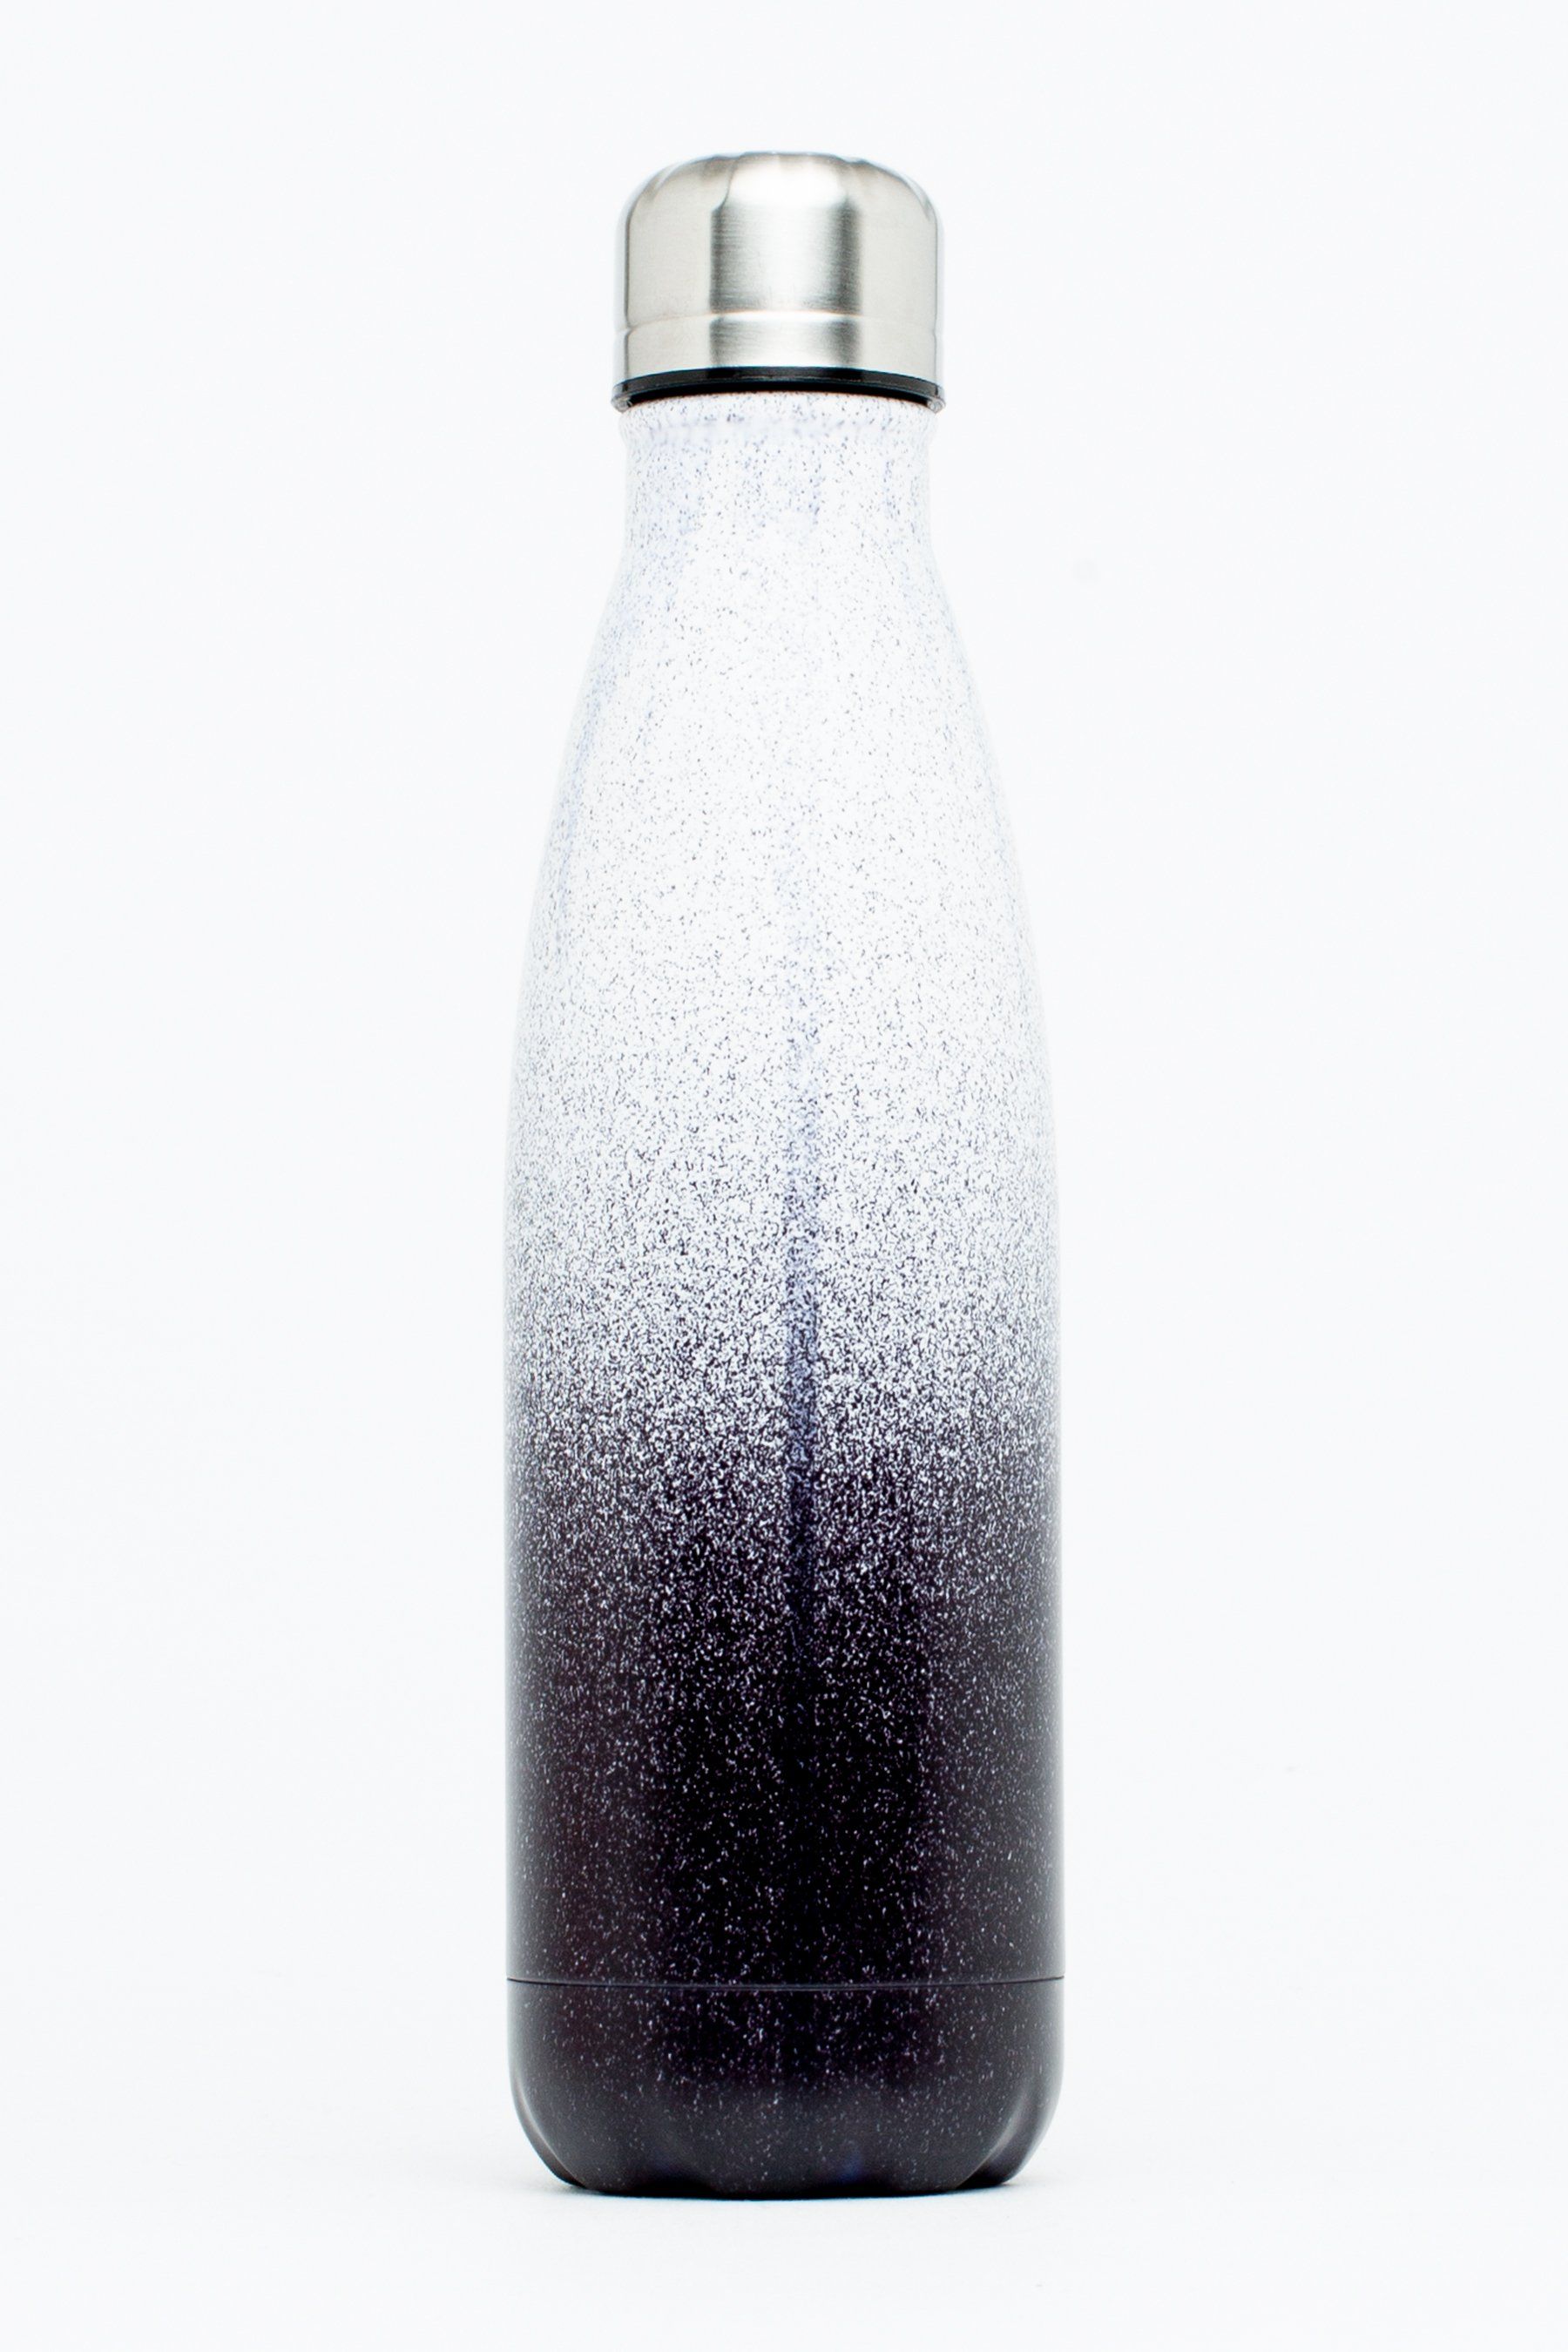 Keeping you hydrated, in style. Meet the HYPE. speckle fade metal reusable bottle, perfect for when you're on the go. Designed in Aluminium to ensure your water stays ice-cold and for chillier days, keeping your oat milk latte warm for longer. Why not grab one of our lunch bags or backpacks with a bottle holder to complete the look, we suggest grabbing the matching set.